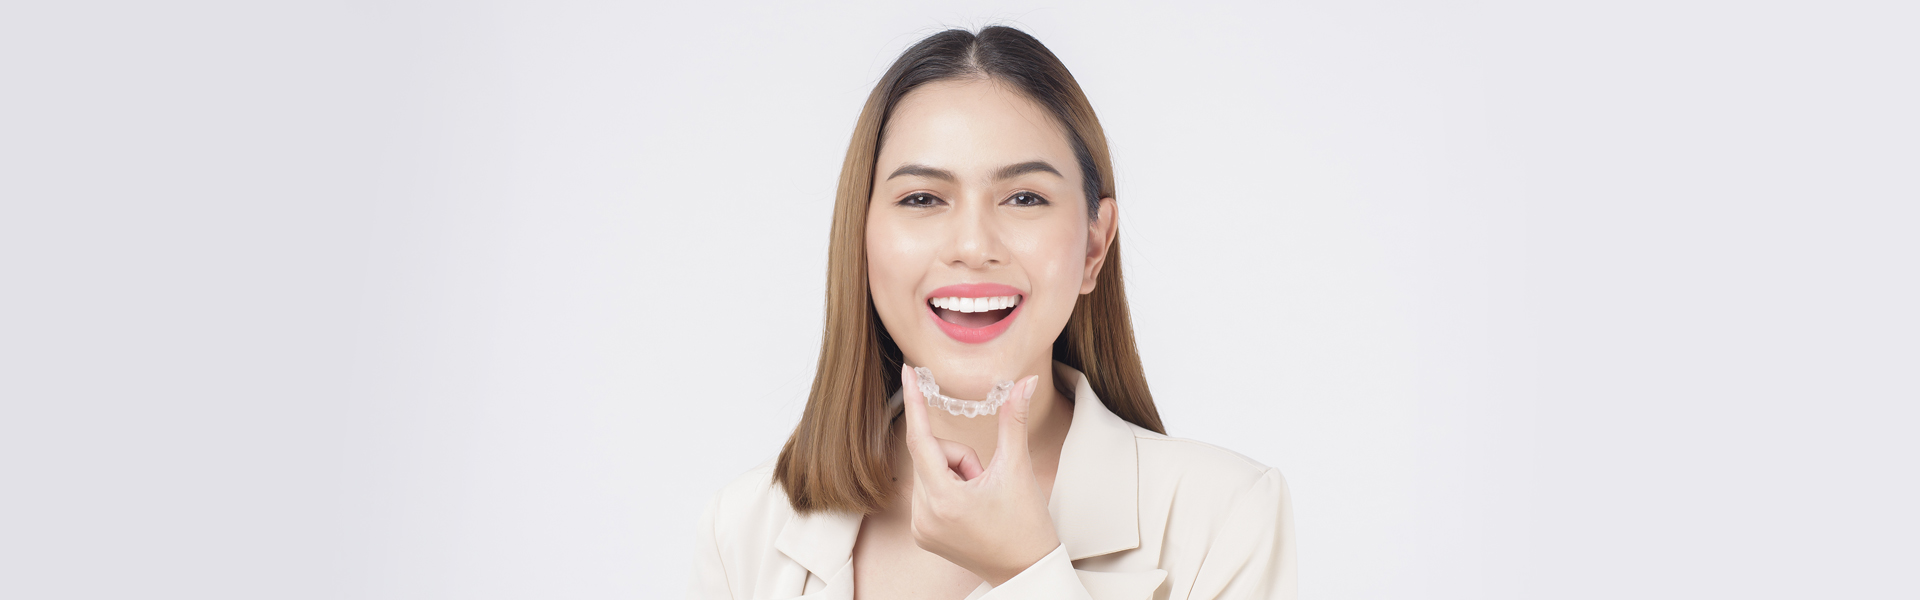 Are Invisalign Aligners Ideal for Patients of all Ages?